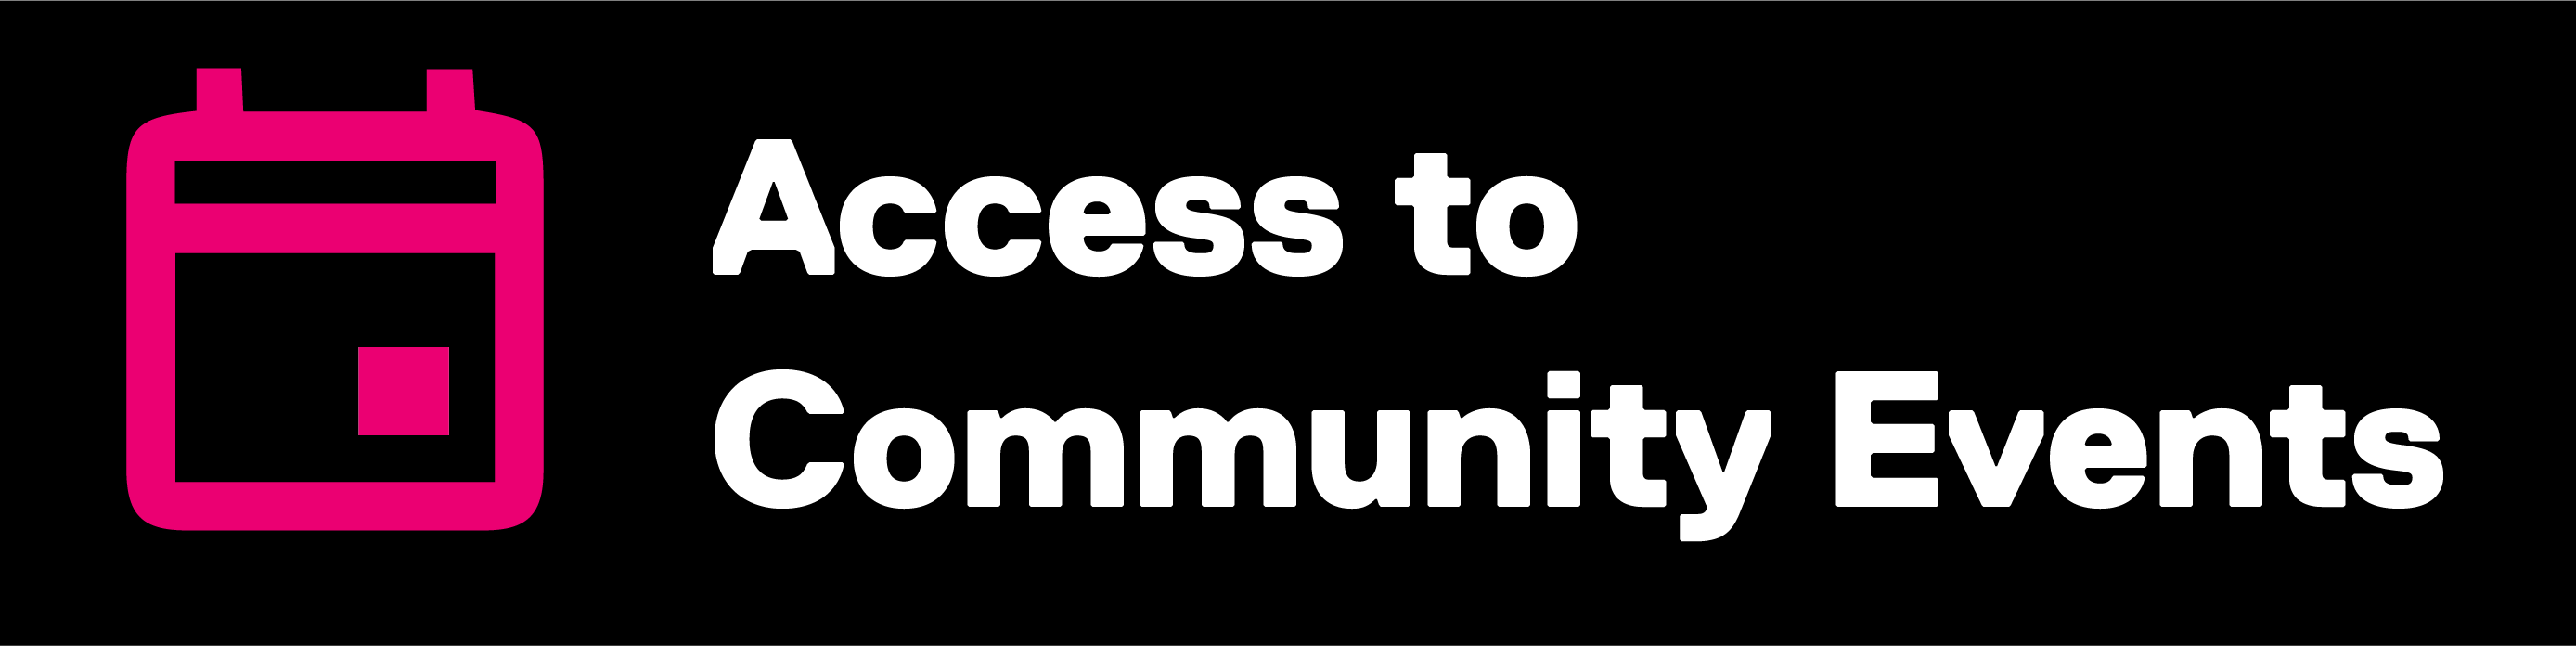 Access to community events